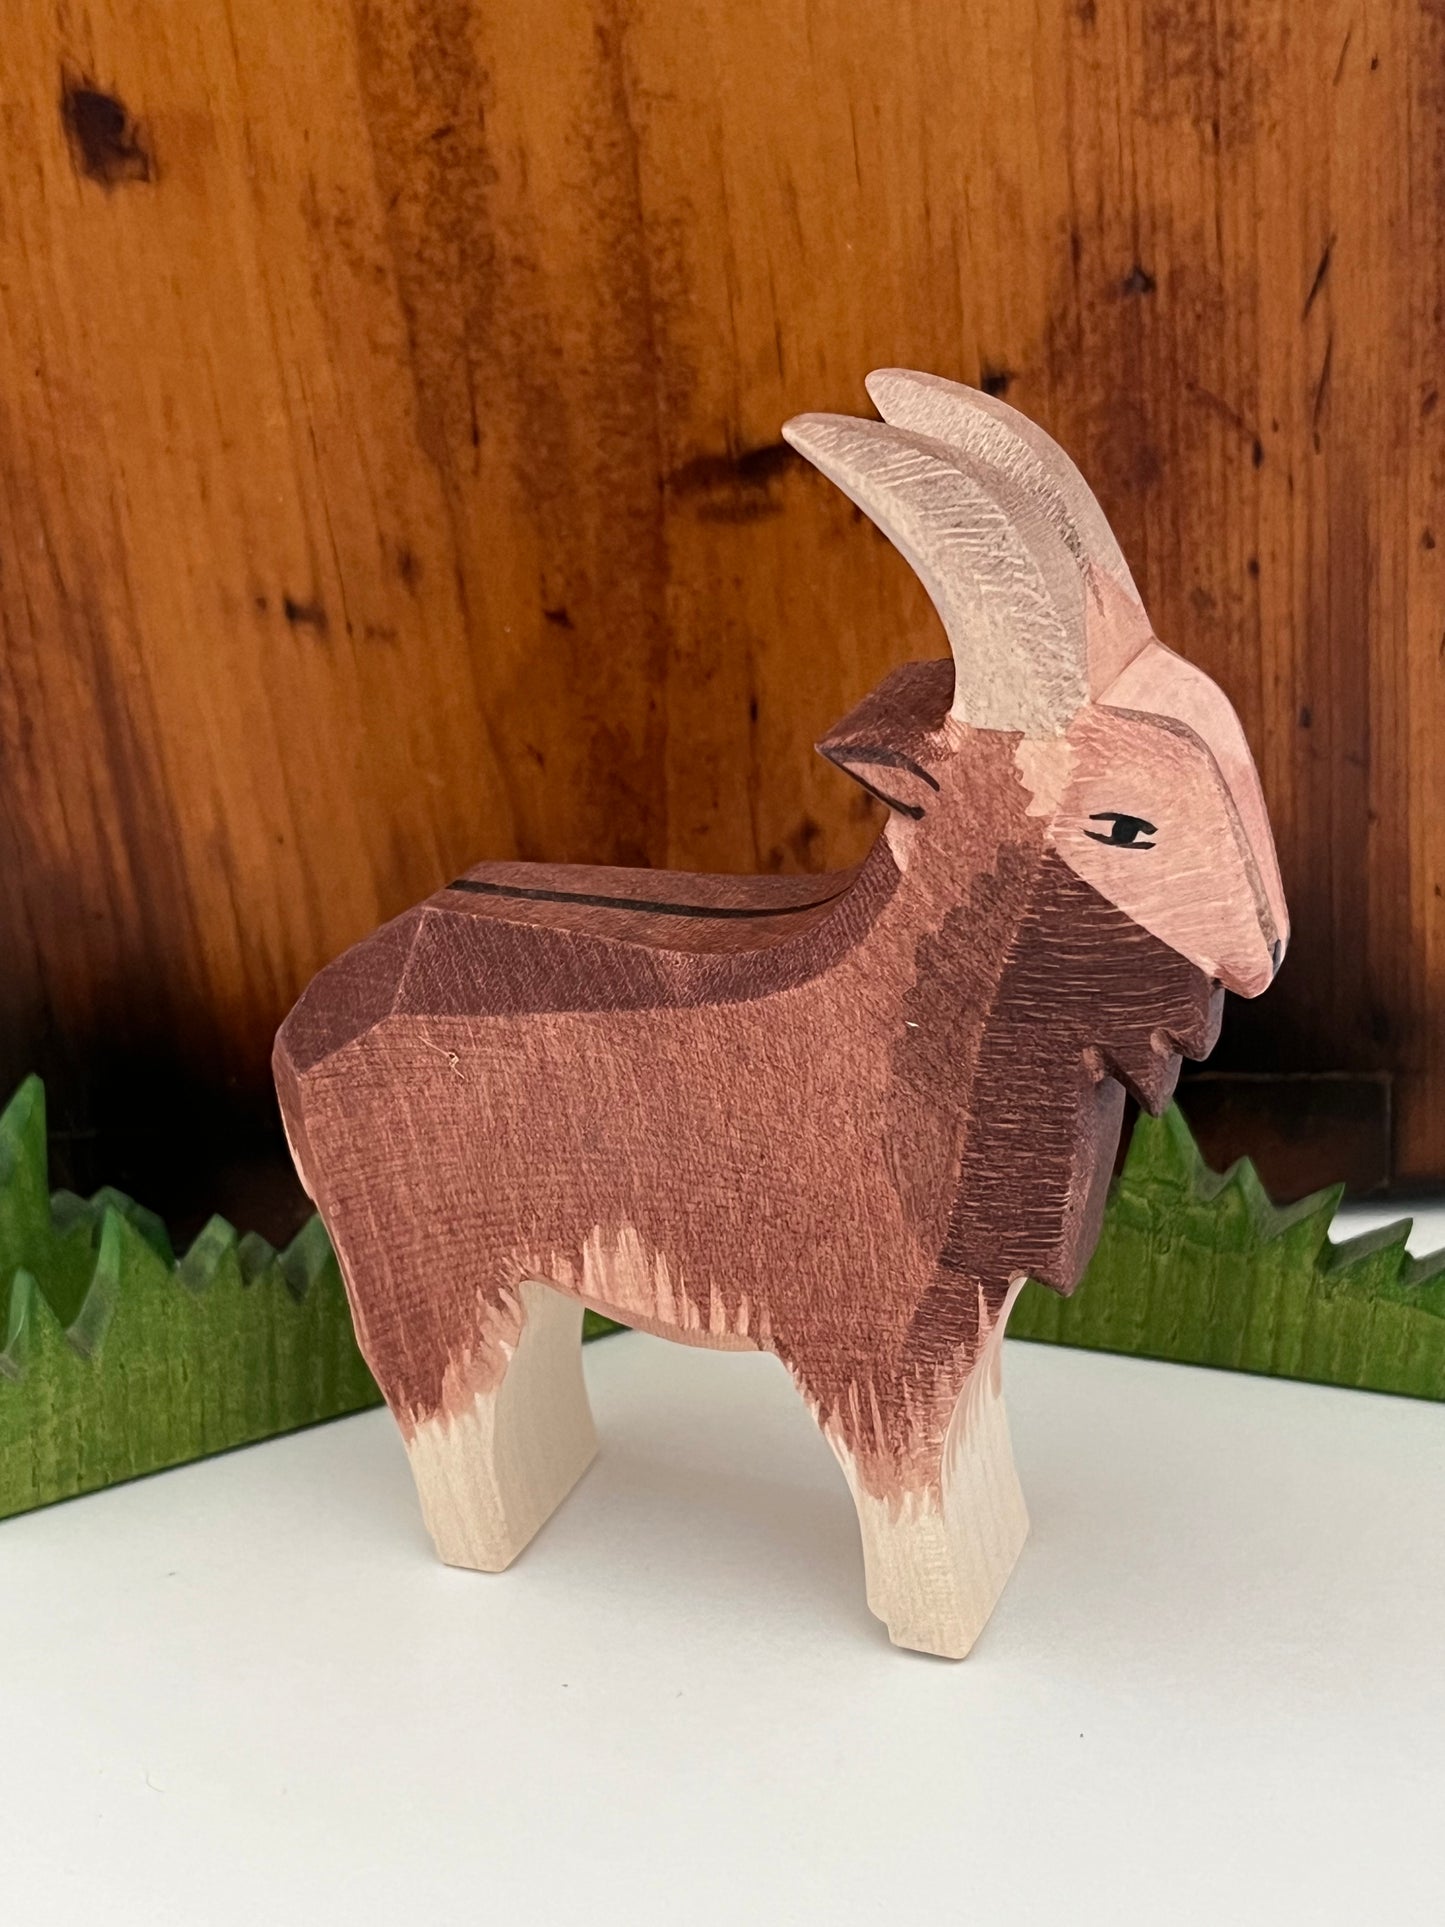 Wooden Dollhouse Play - GOAT, Brown Buck with horns